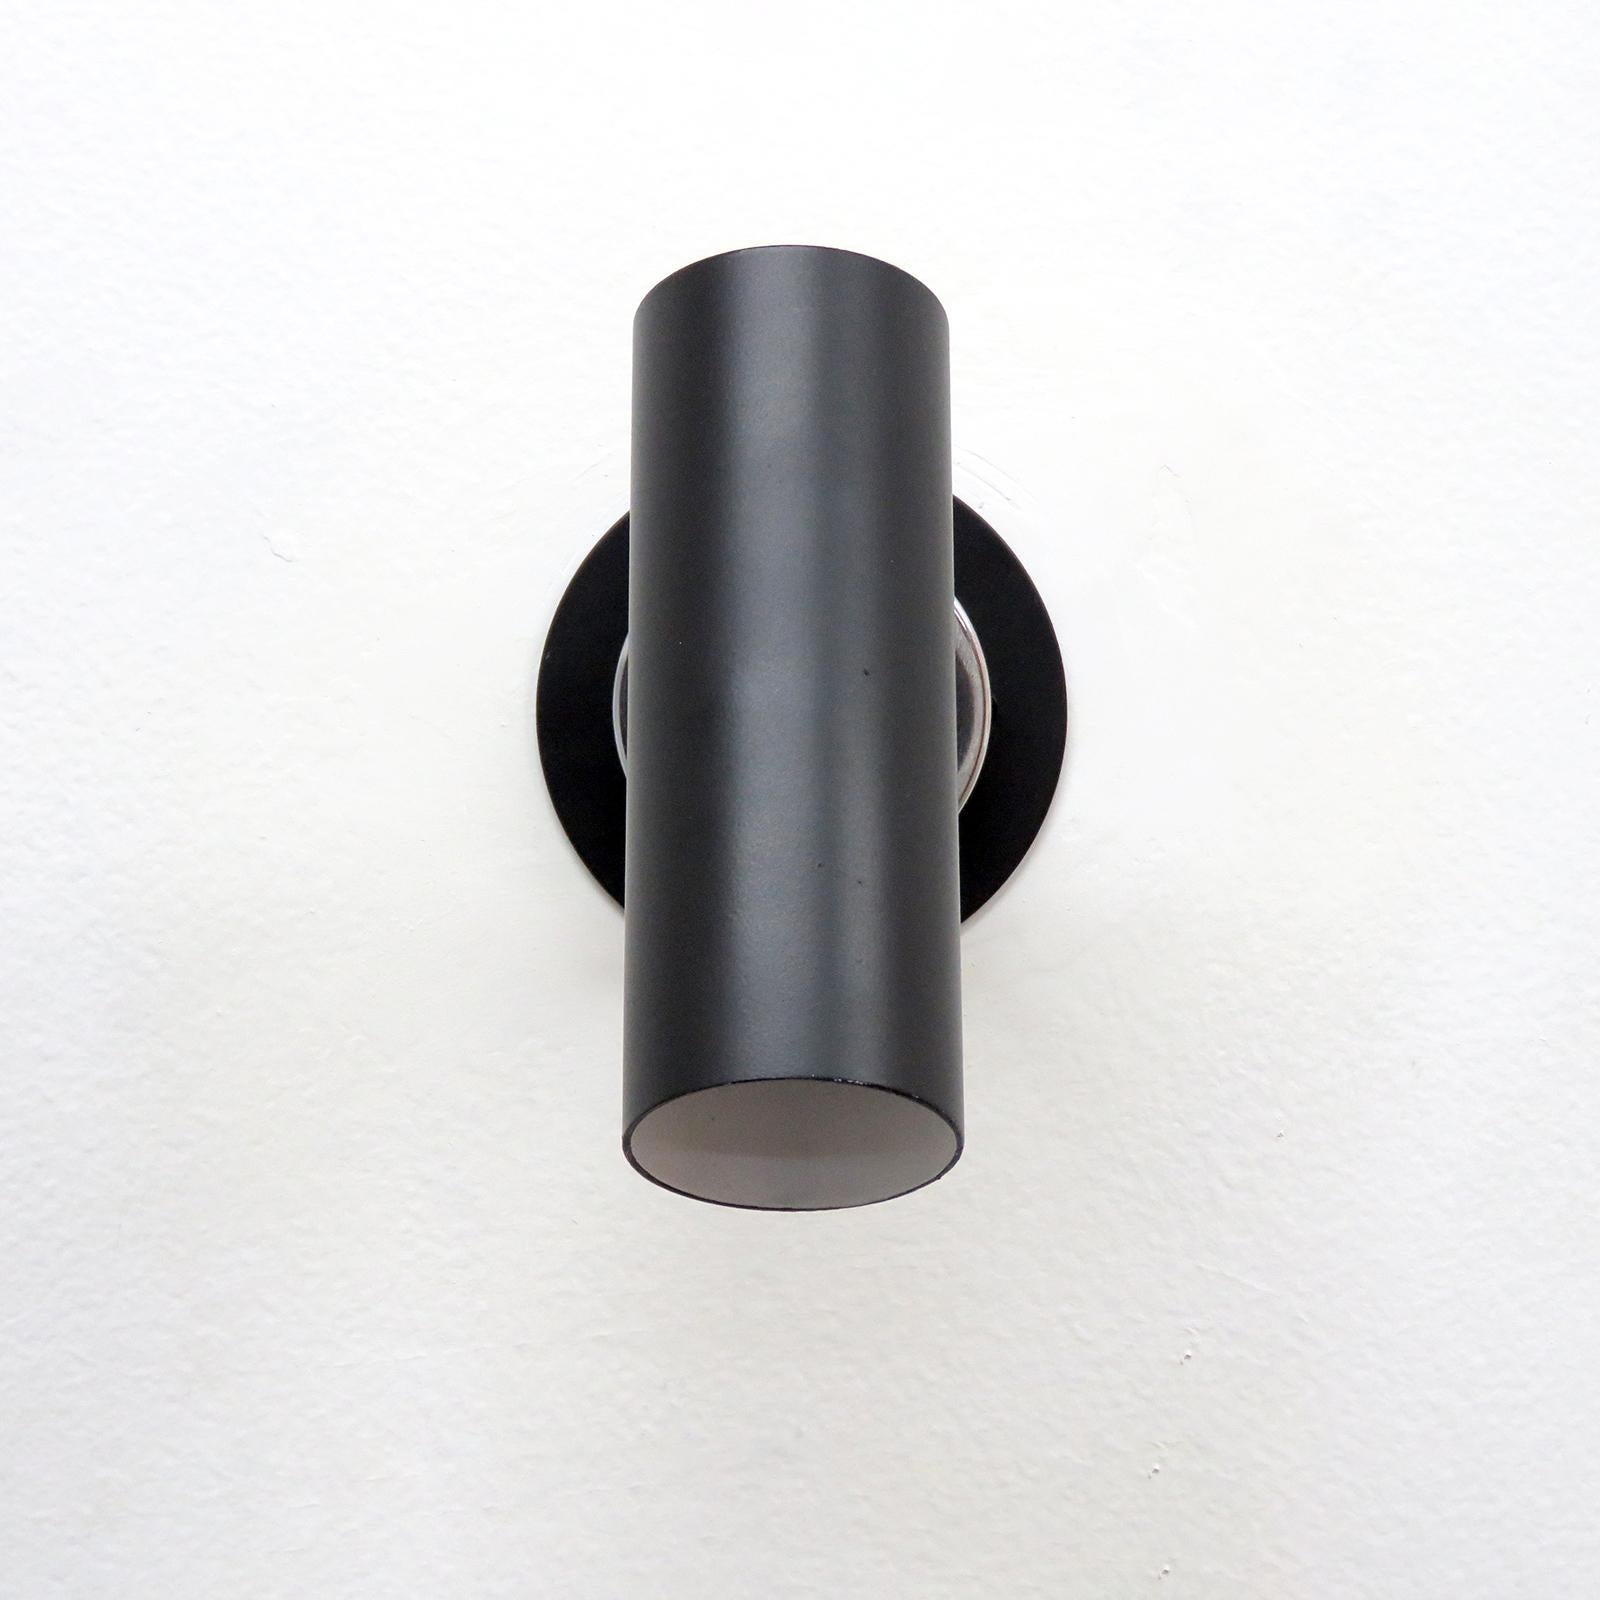 wonderful minimalist wall lights model 31B designed by Gino Sarfatti, manufactured by Arteluce, Italy 1950 with black enameled metal shades on chrome plated double-joint adjustable arms and individual on/off switches on the back plates. Marked with